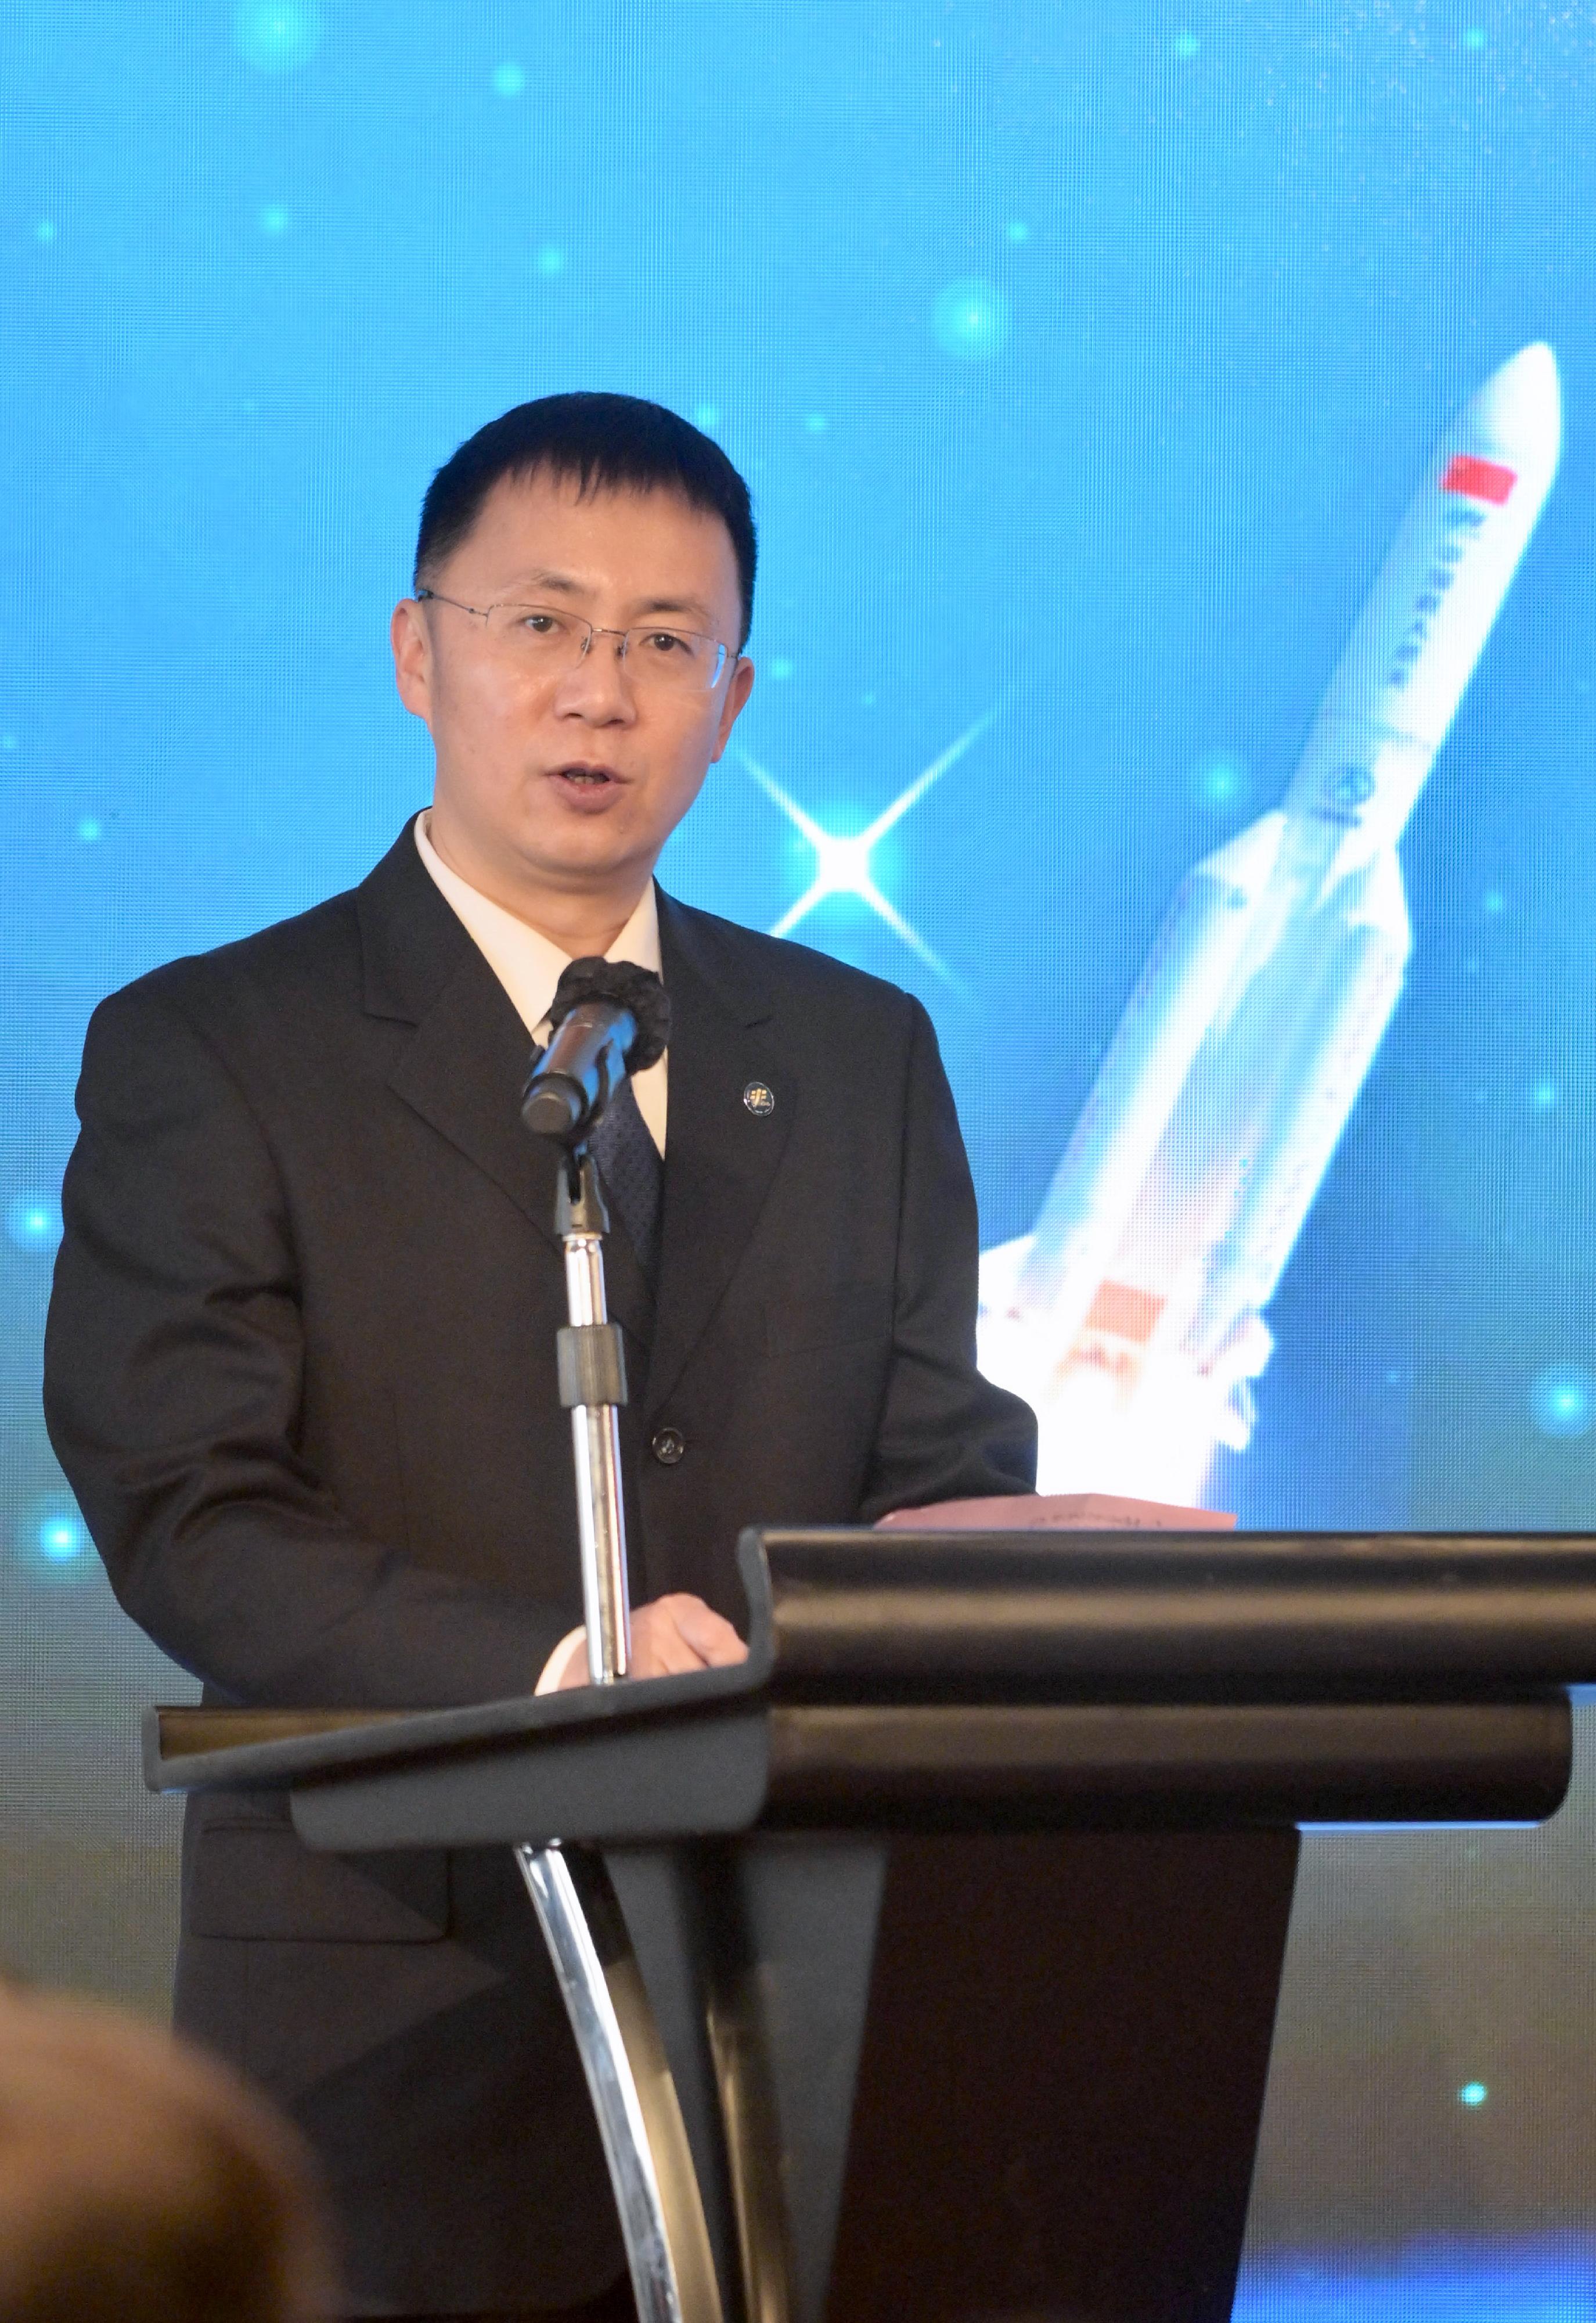 The China Manned Space delegation continued their visit to Hong Kong today (November 30) and attended a luncheon hosted by the Innovation, Technology and Industry Bureau to meet with the innovation and technology tertiary education sectors and exchange views. Photo shows the leader of the delegation and Deputy Director General of the China Manned Space Agency, Mr Lin Xiqiang, speaking at the luncheon.